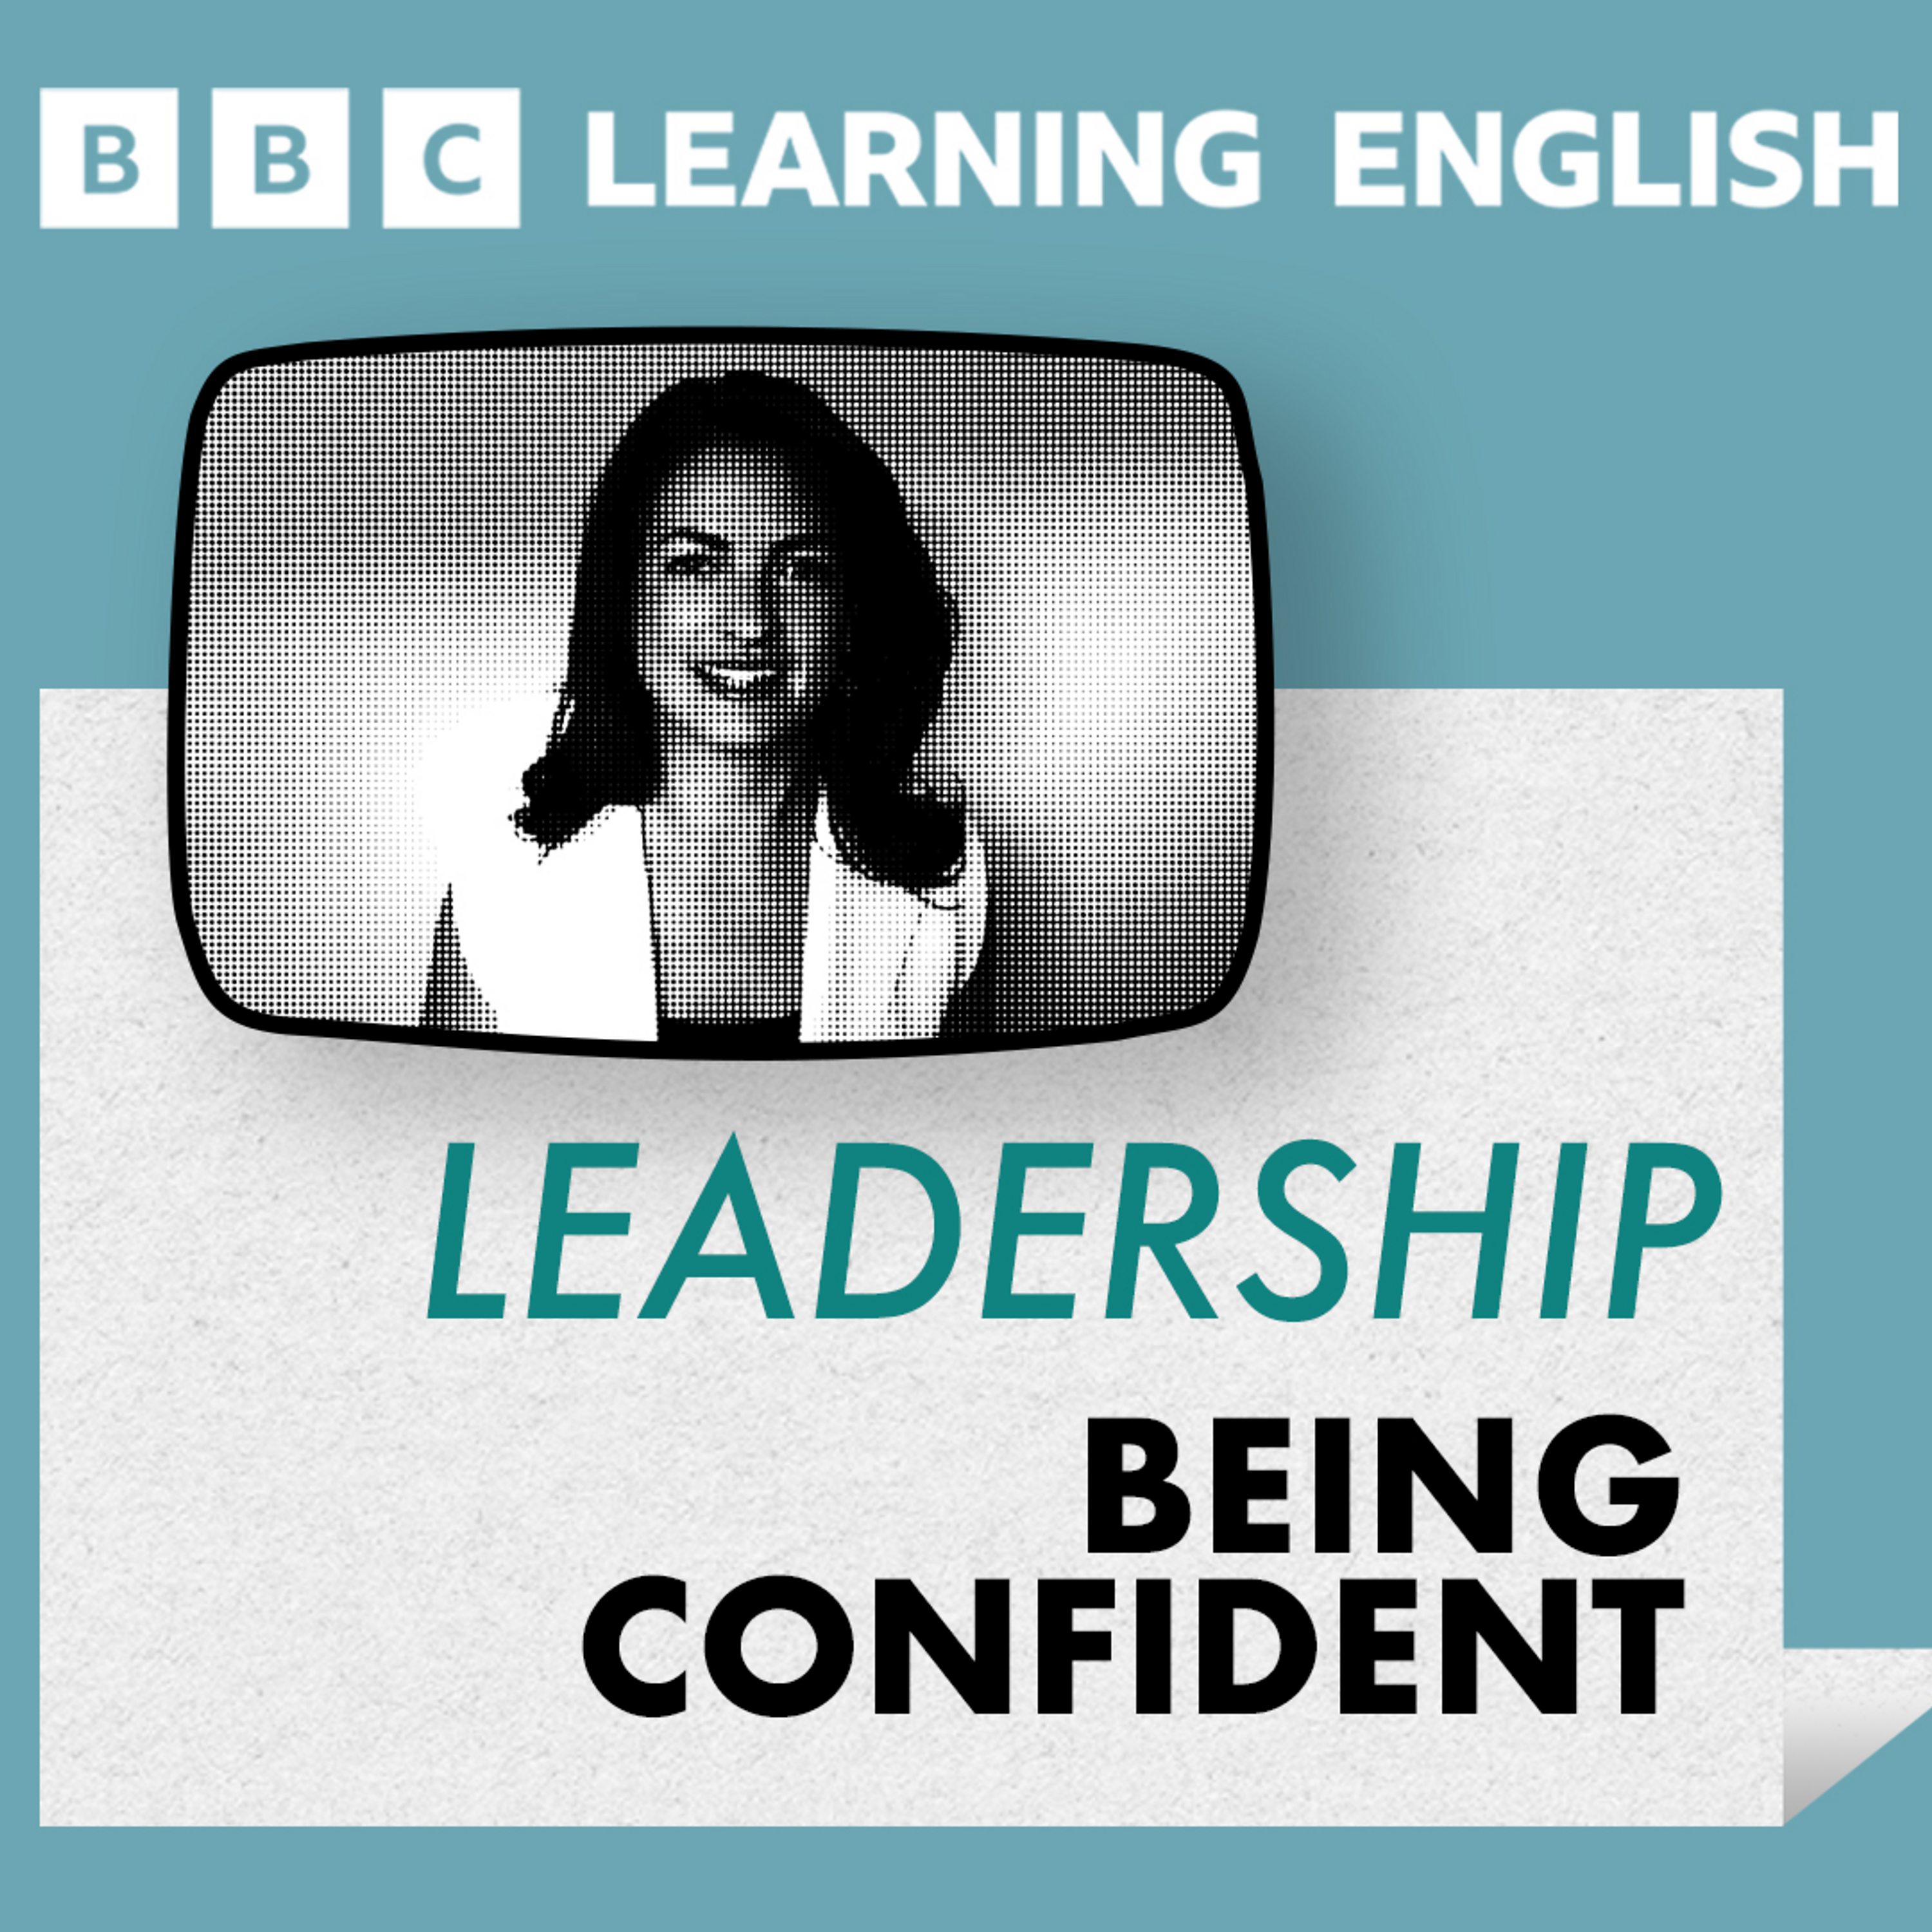 Leadership: Being confident